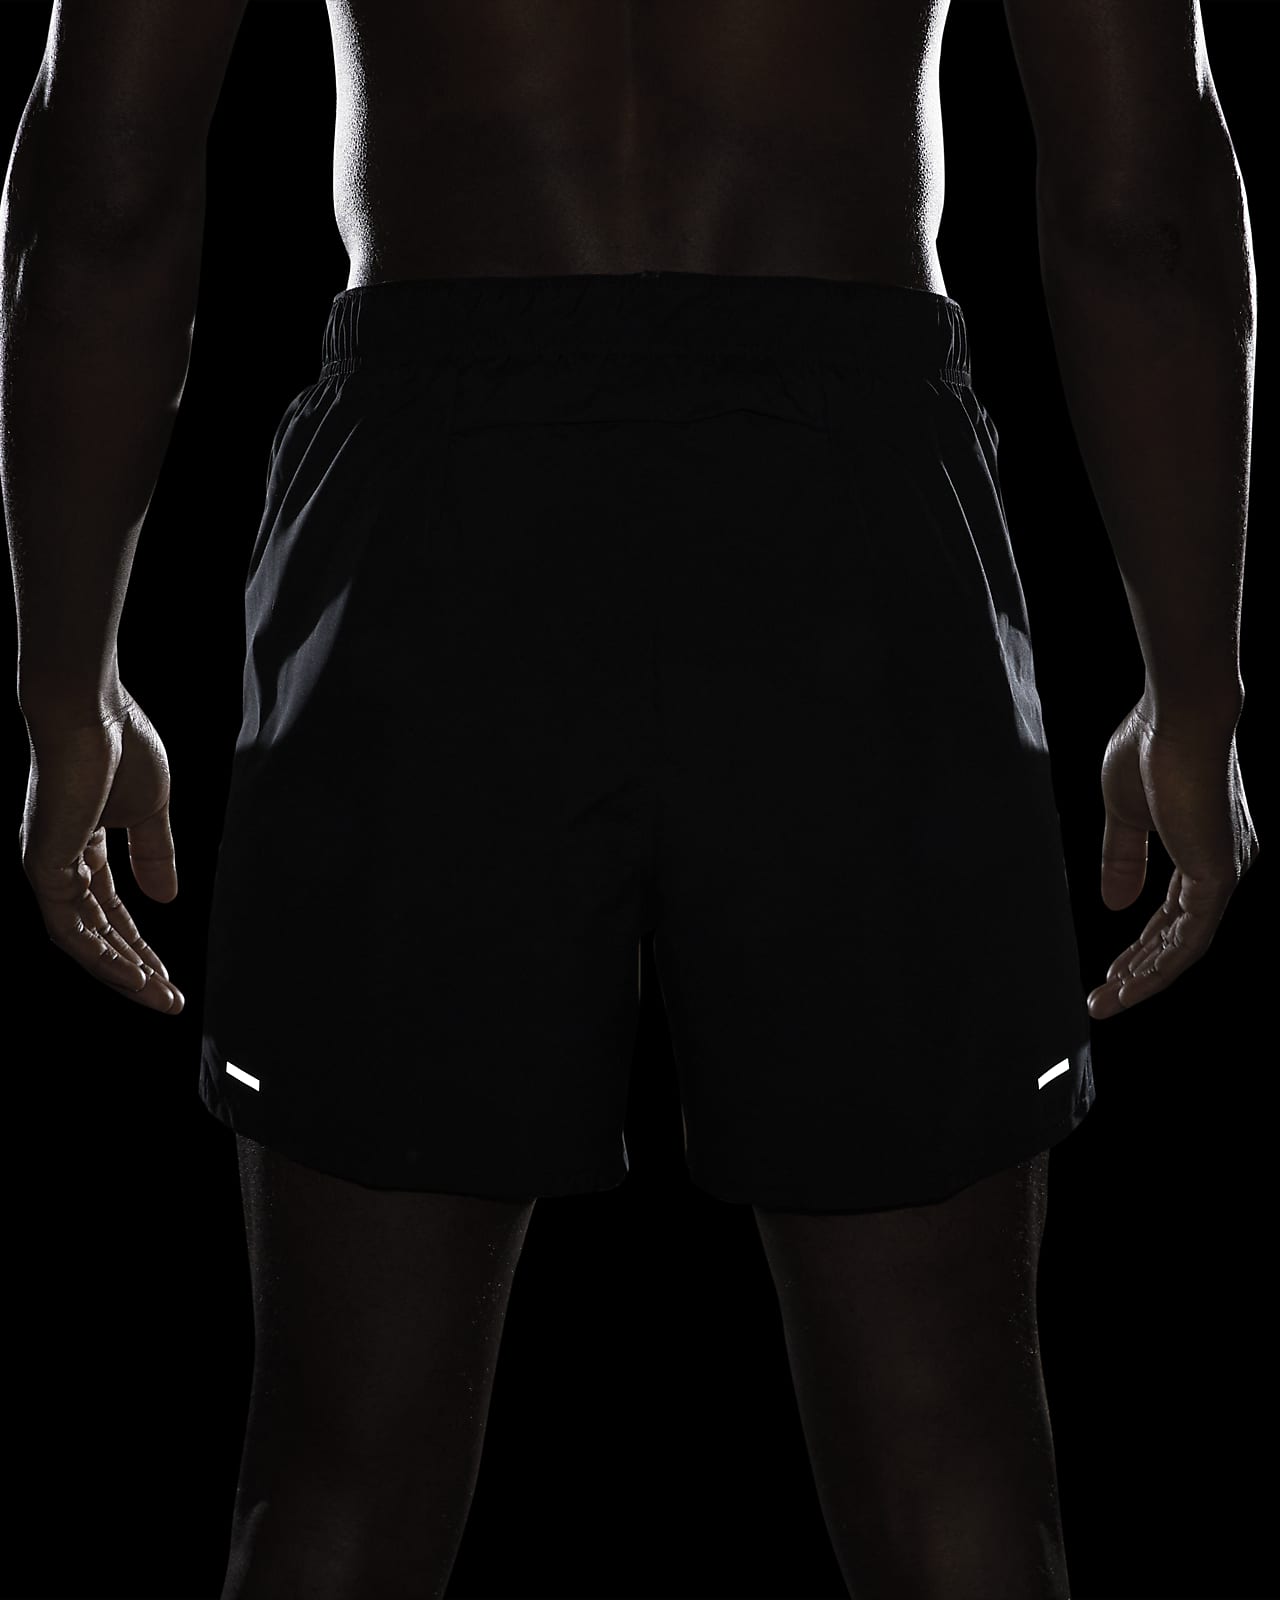 Nike Dri-FIT Run Division Challenger Men's 13cm (approx.) Brief-Lined ...